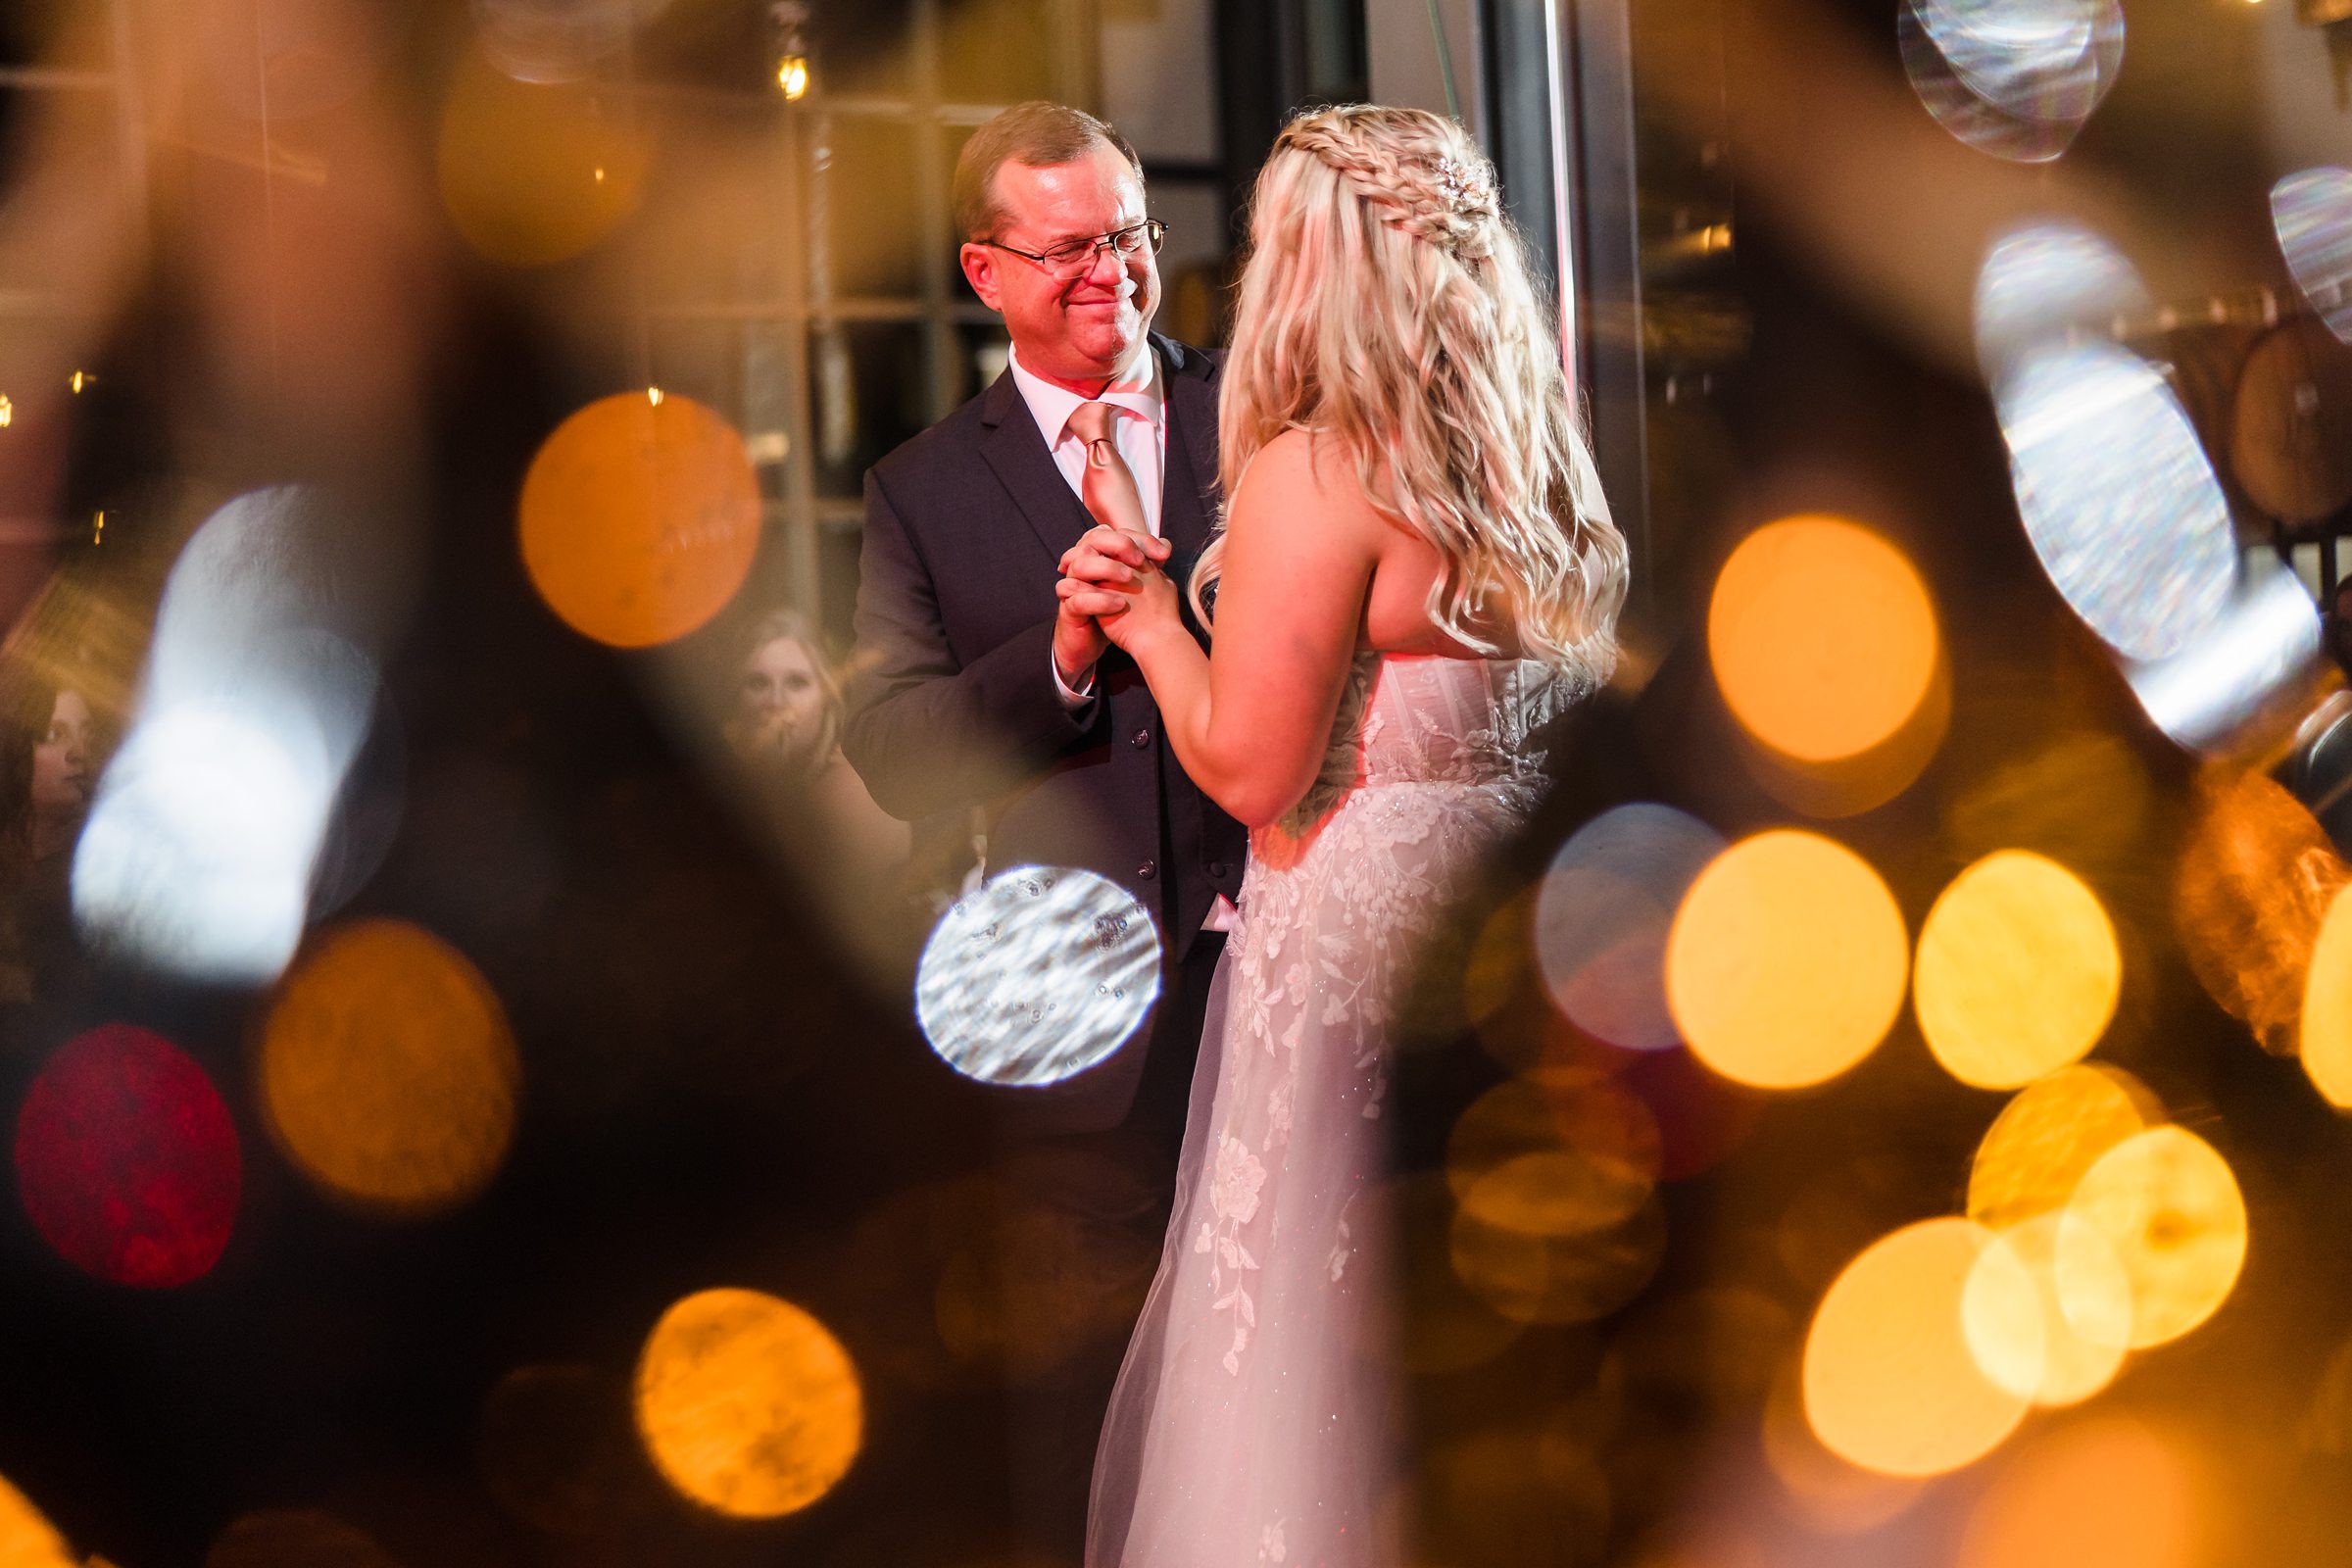 Bride dances with her father during a wedding at the Destihl Brewery in Normal, Illinois